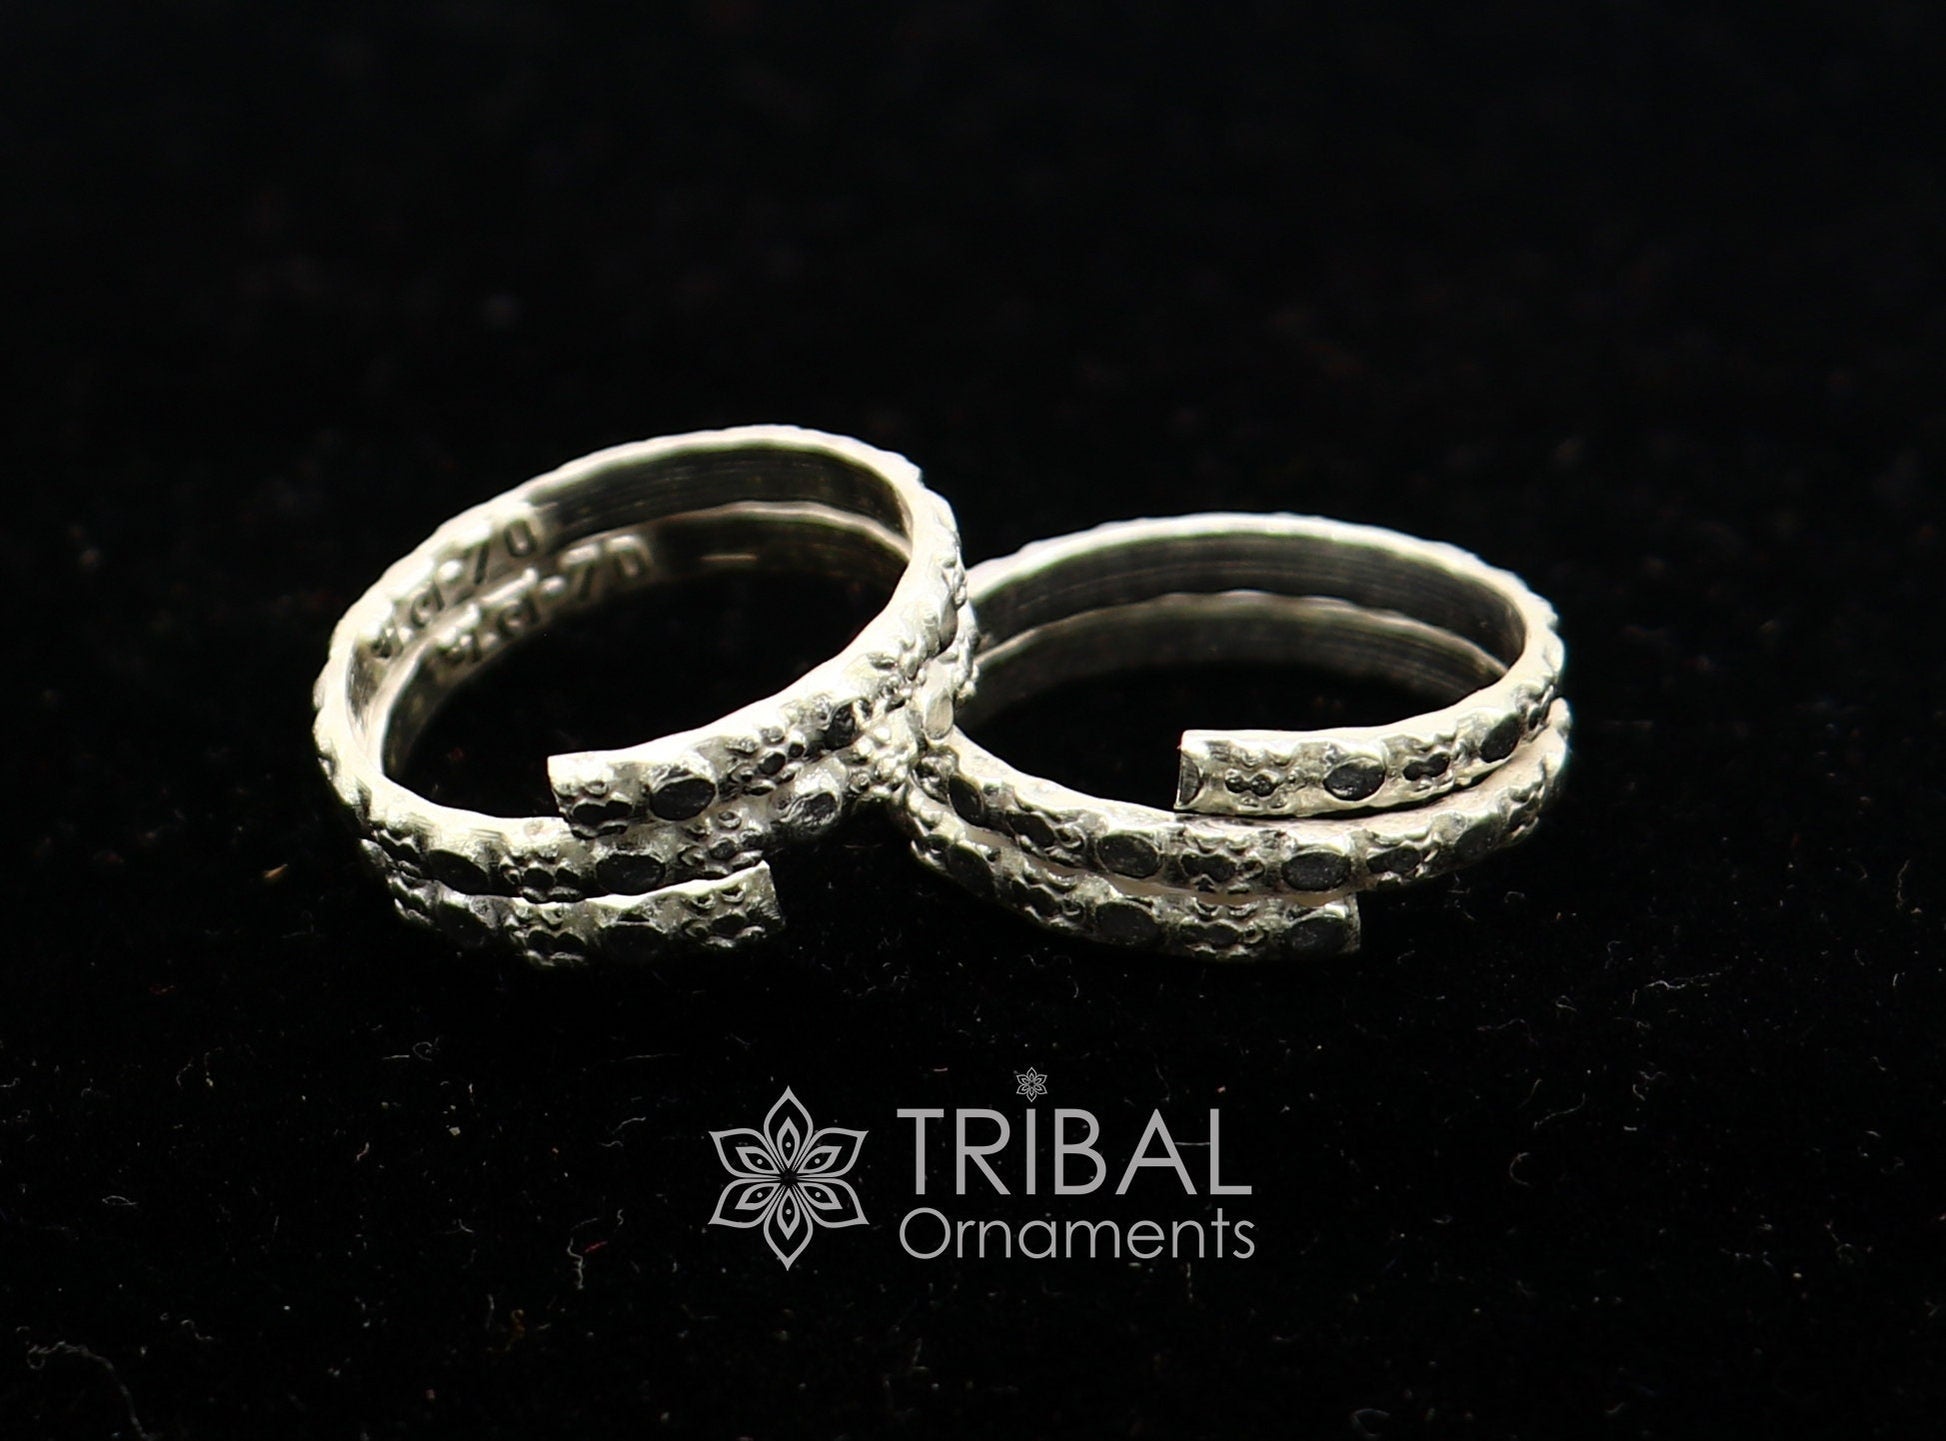 Traditional cultural style solid silver toe ring band handmade spiral design women's jewelry from India amazing tribal jewelry ntr196 - TRIBAL ORNAMENTS